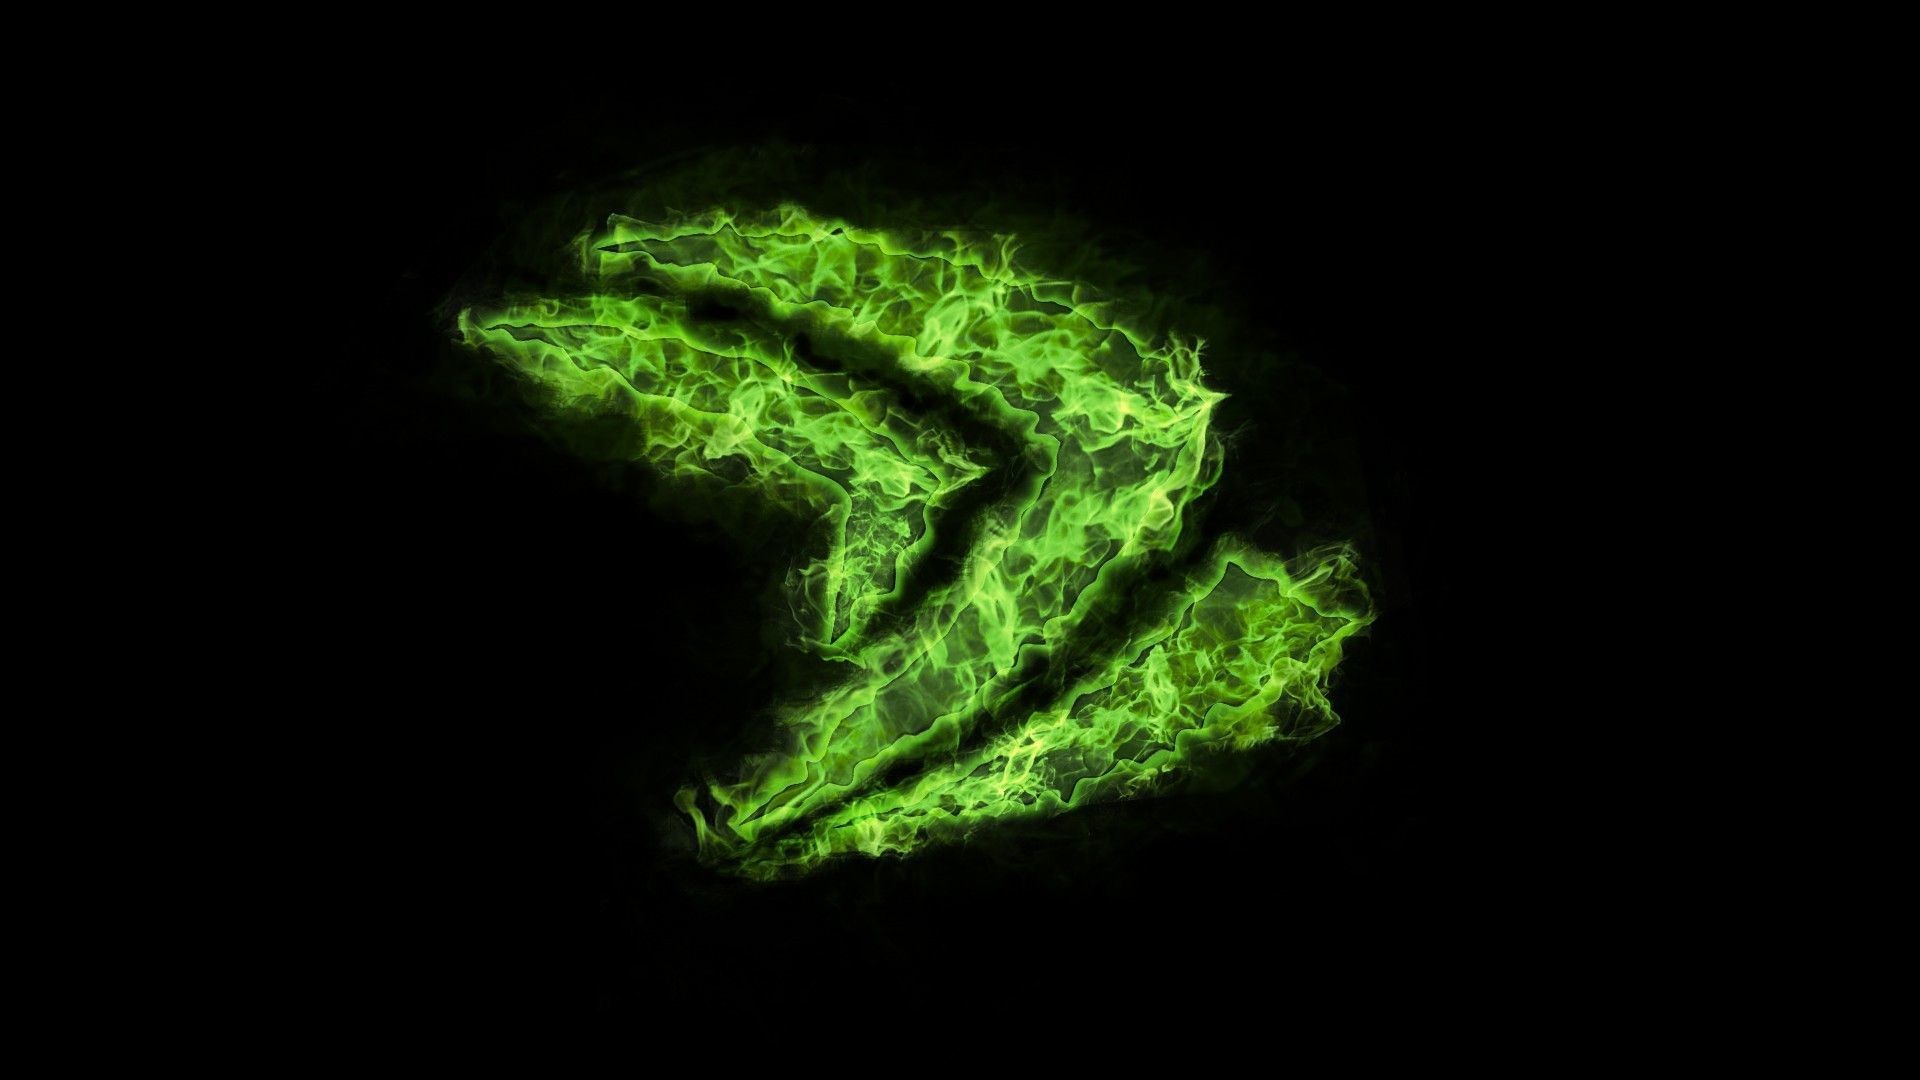 Logo Nvidia green flame wallpapers and images – wallpapers